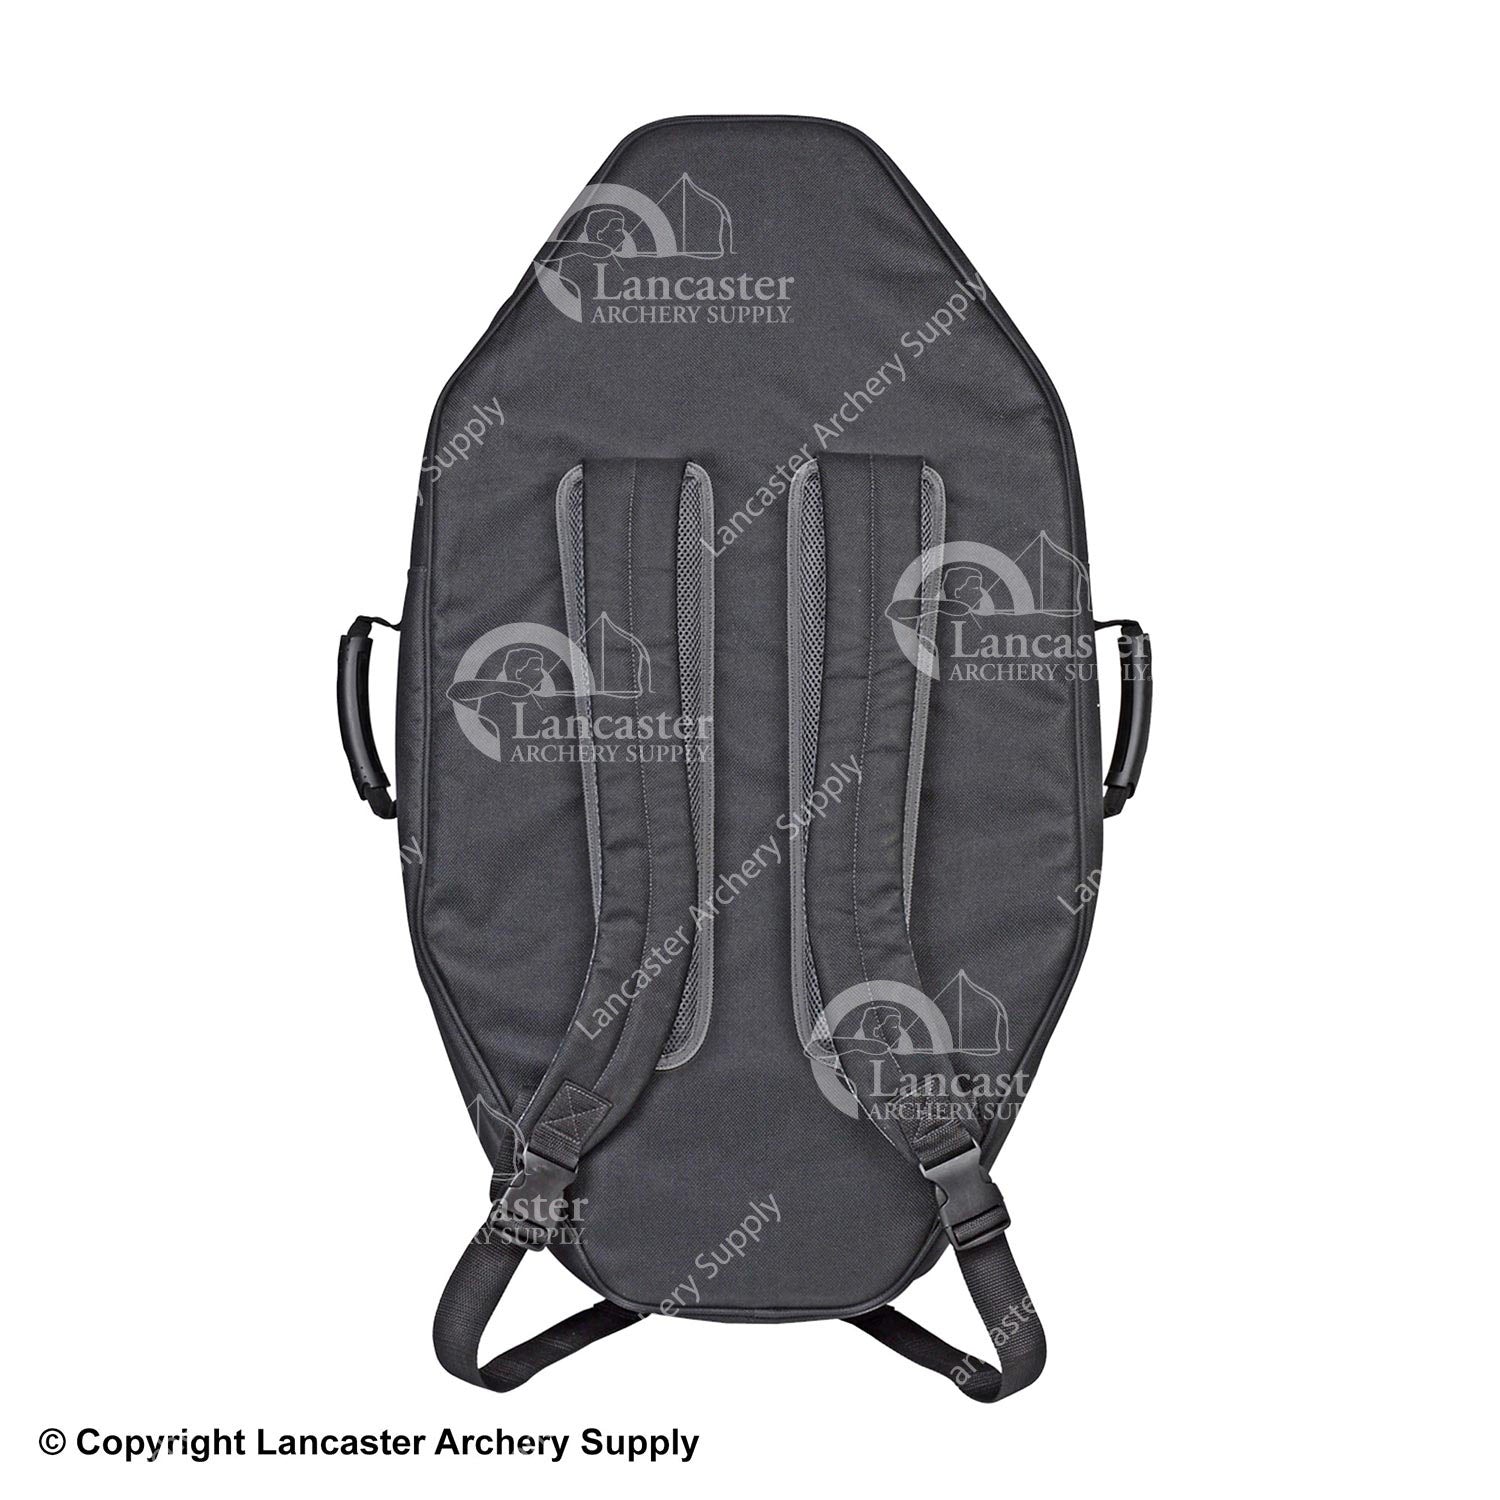 The back and shoulder straps of the crossbow case.